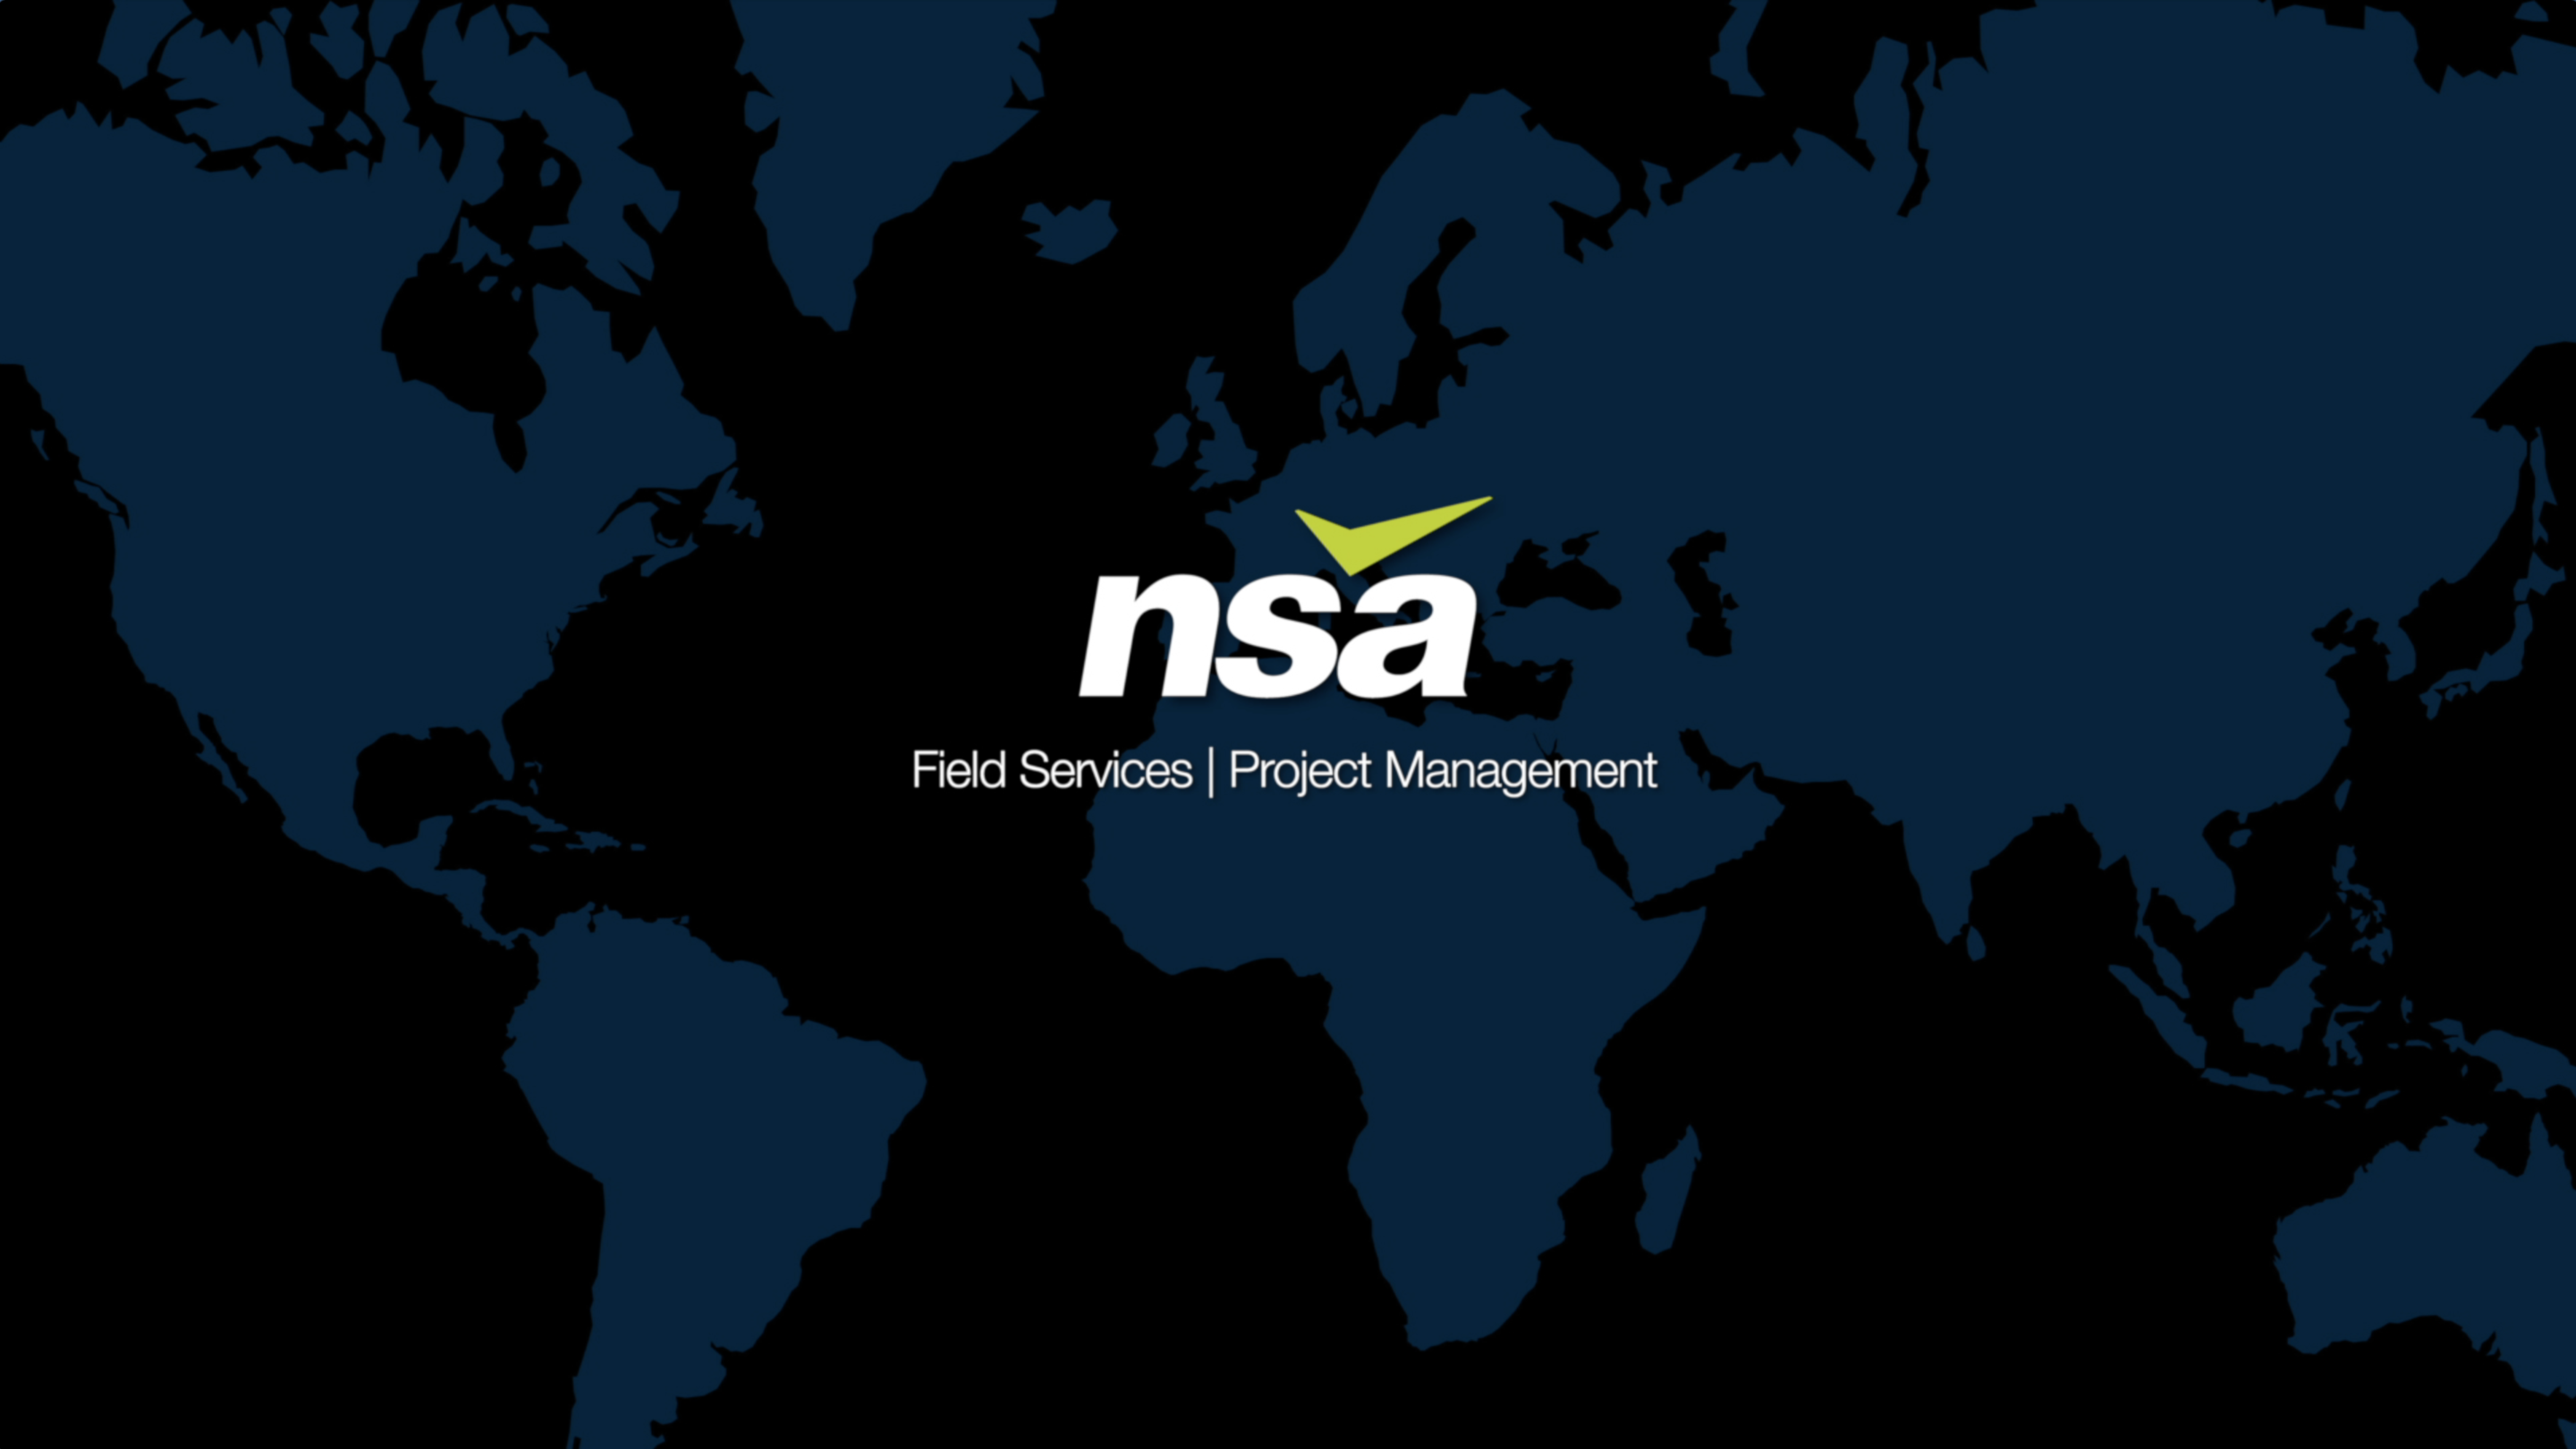 NSA delivers field service solutions to thousands of business-owned locations every week. We work in convenience stores, big-box stores, fast-casual restaurants, financial institutions, airports, hospitals, school campuses, sports and entertainment venues, warehouses, government properties, factories and more.